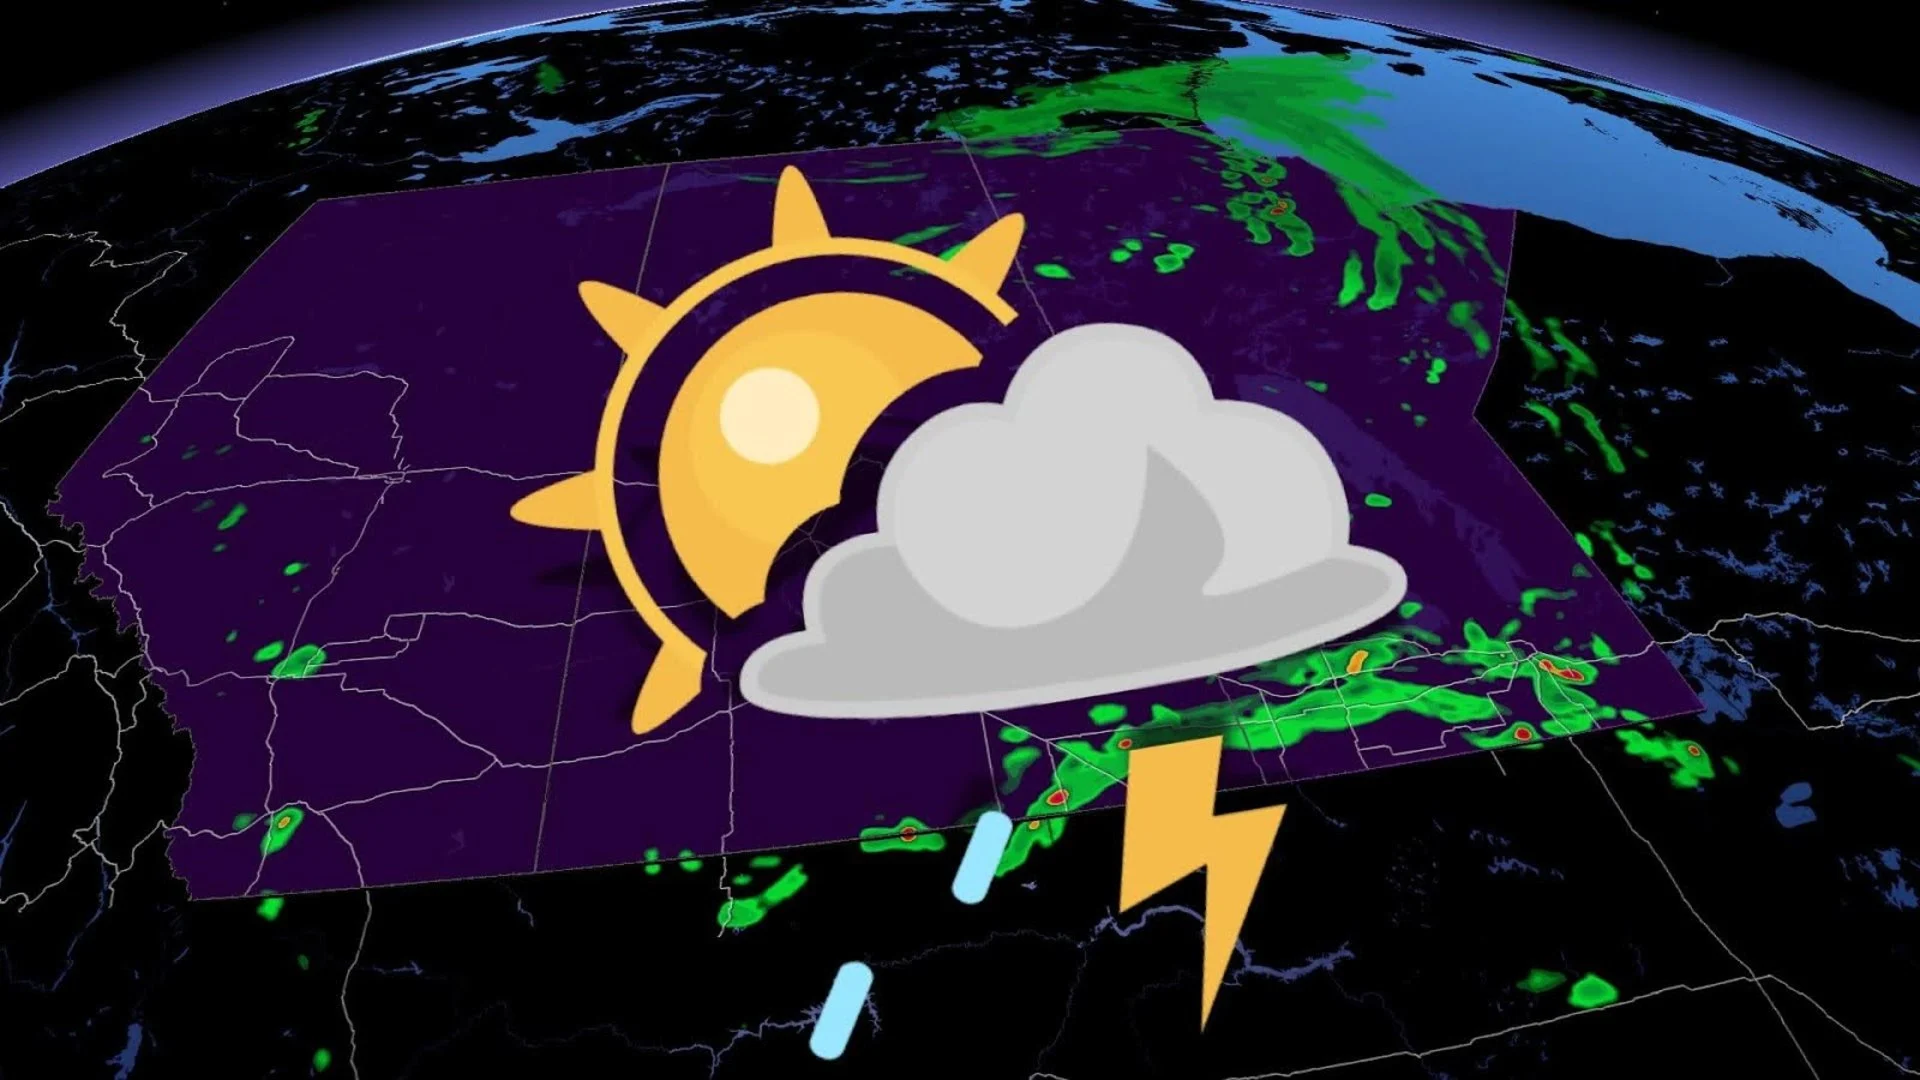 Watch out for severe thunderstorms popping up in southeastern Saskatchewan on Saturday. See the full forecast, here